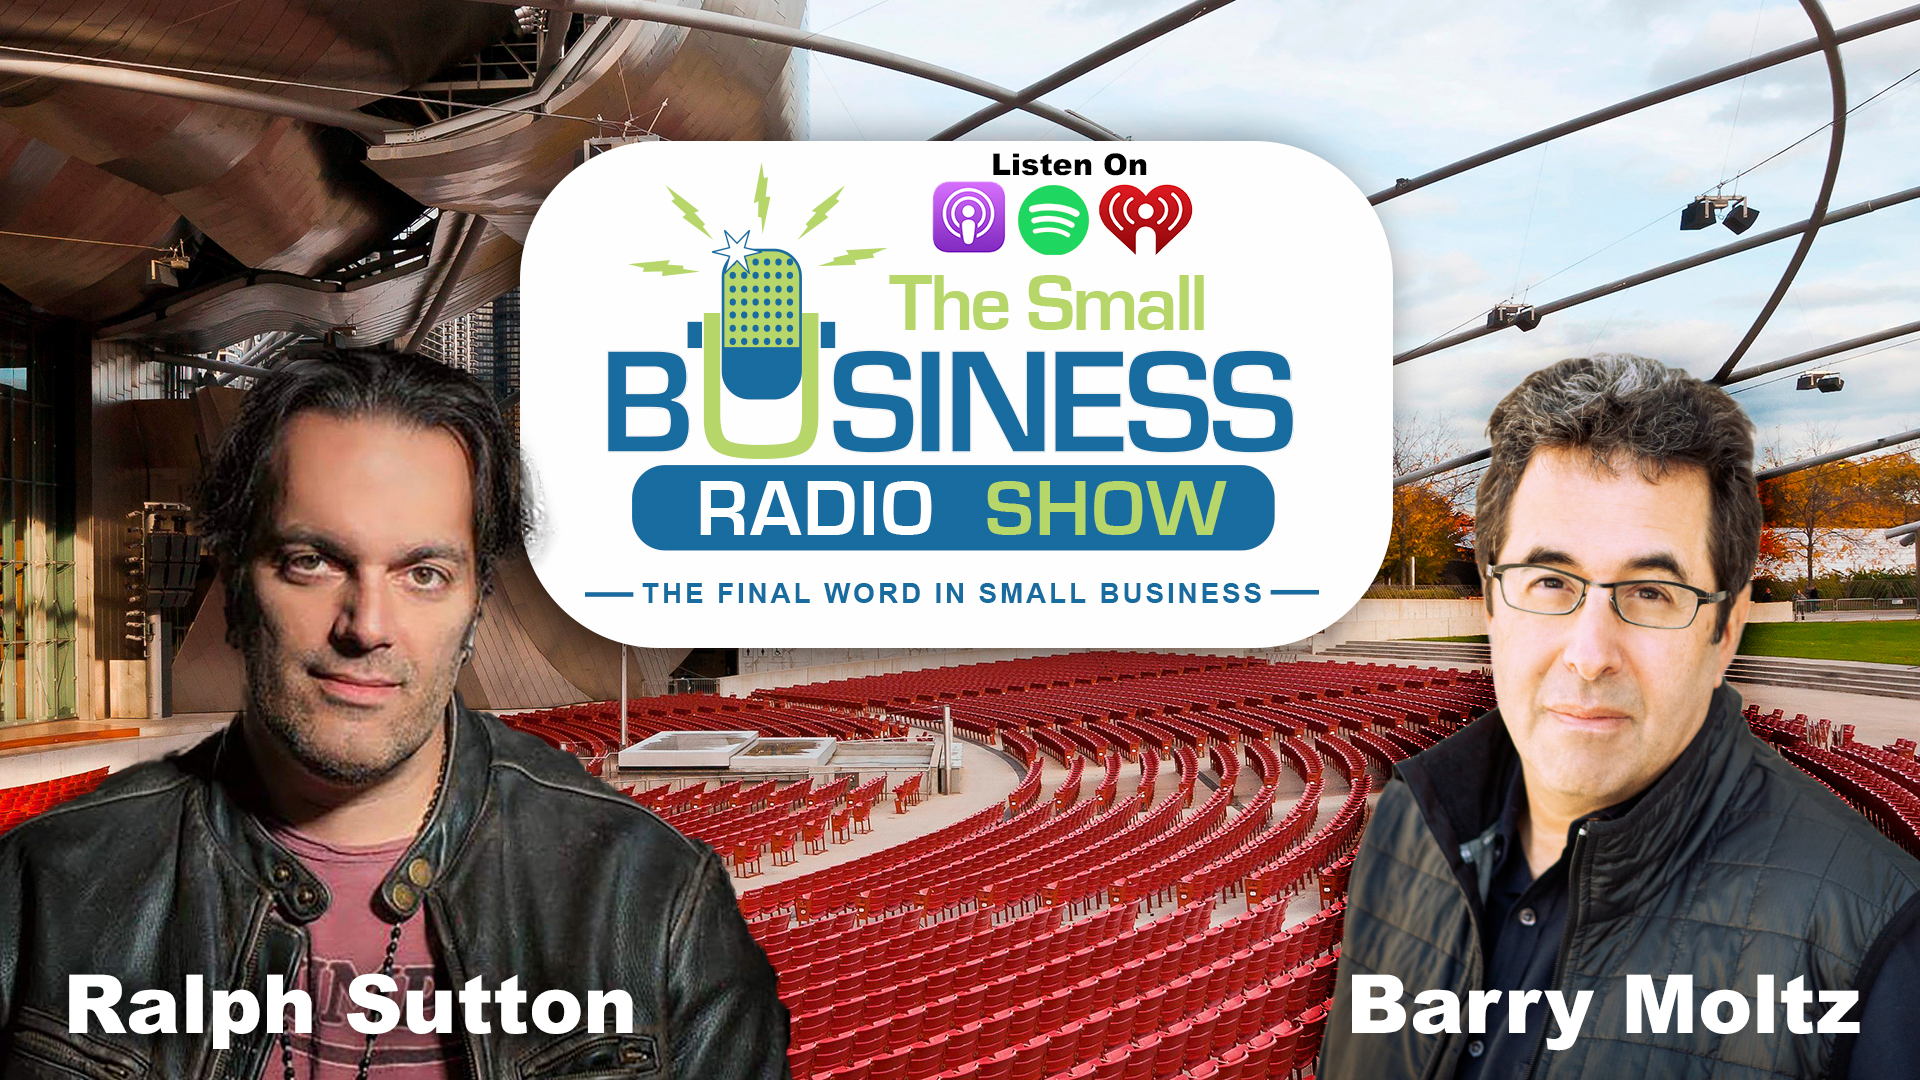 Ralph Sutton on The Small Business Radio Show